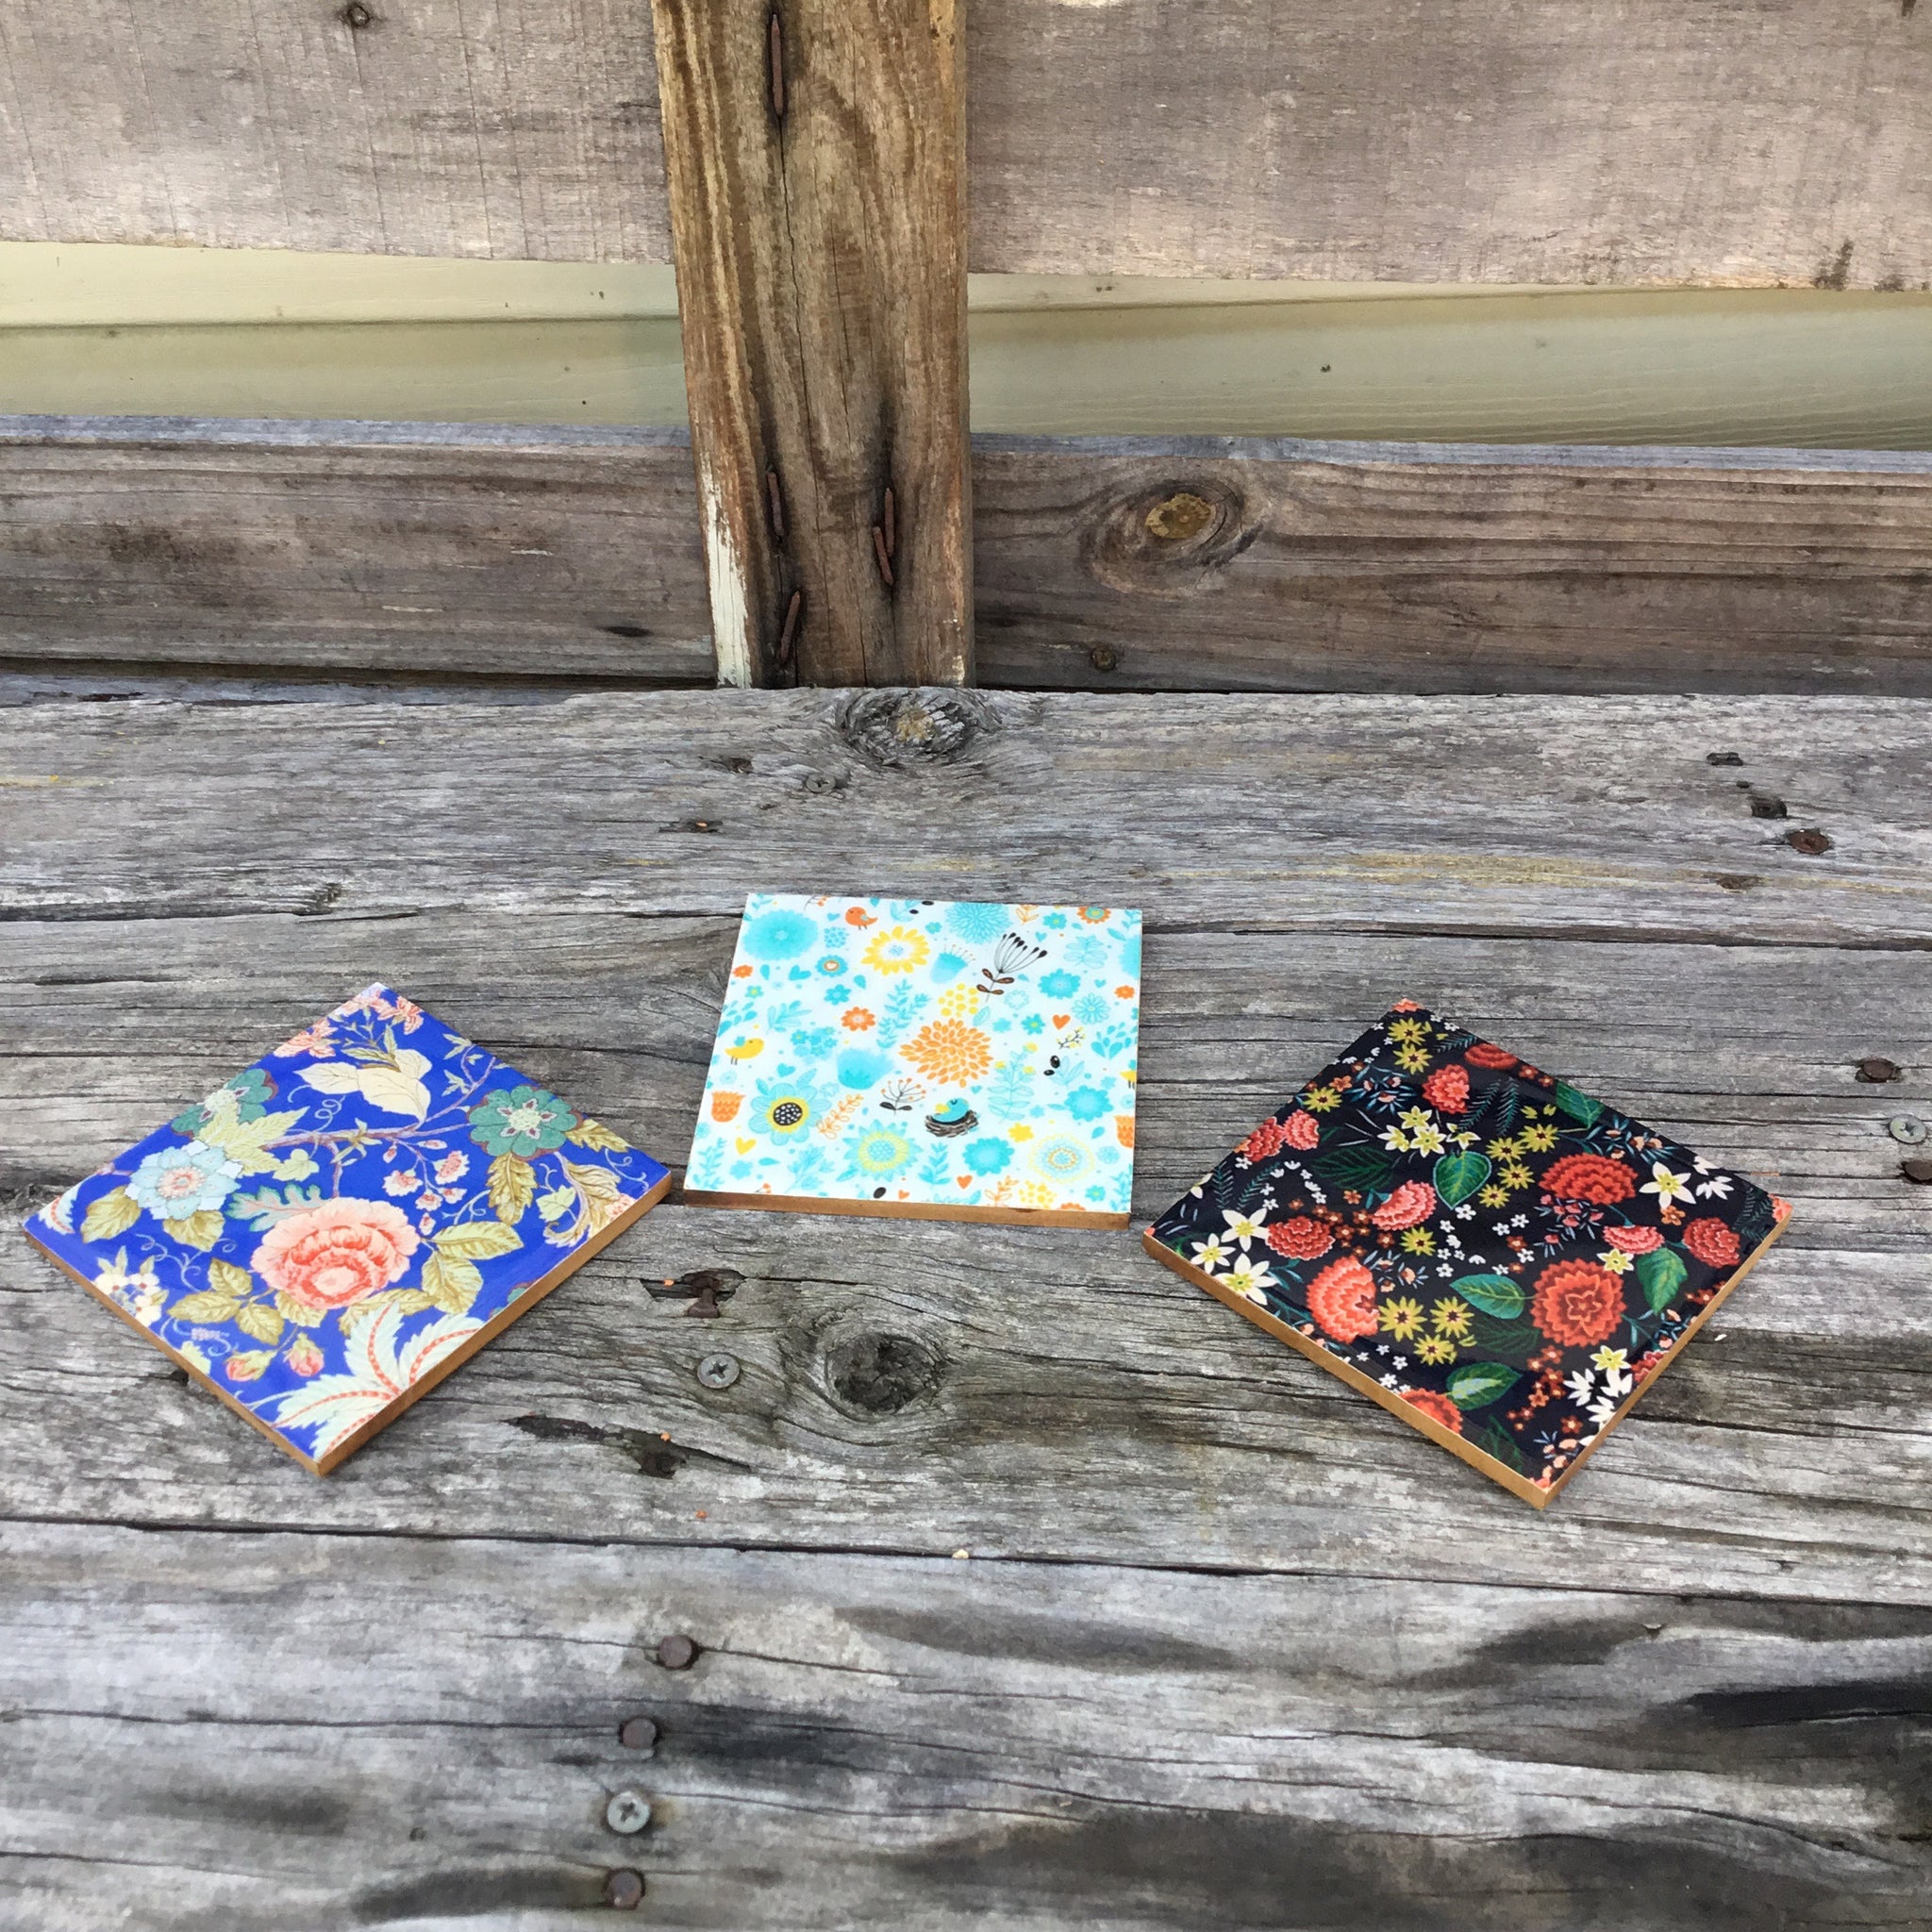 Fair Trade Ethical Resin and Wood Floral Coaster